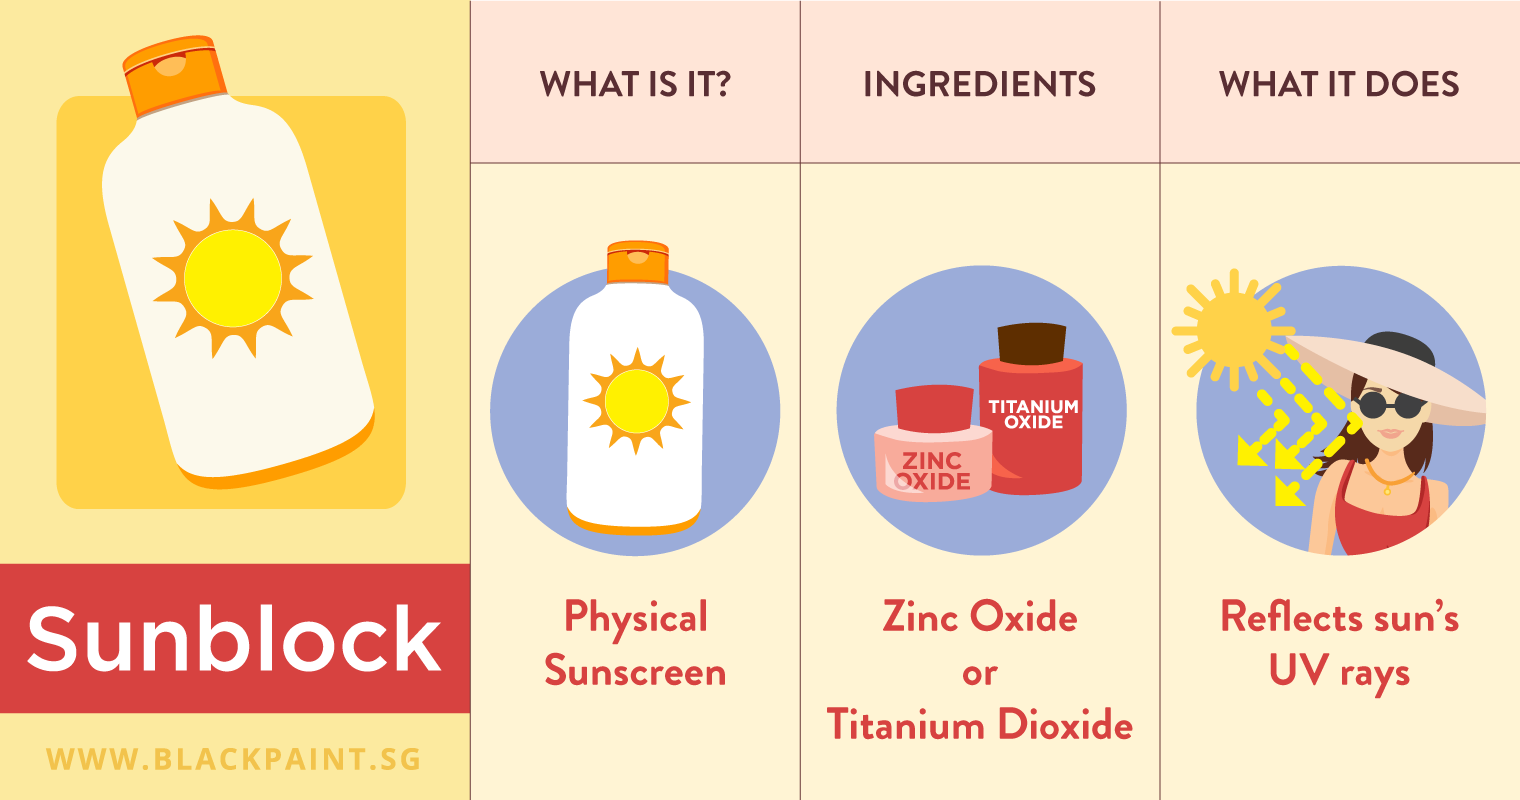 illustration of sunblock is a physical sunscreen that contains zinc oxide or titanium dioxide as ingredients to reflect UV rays